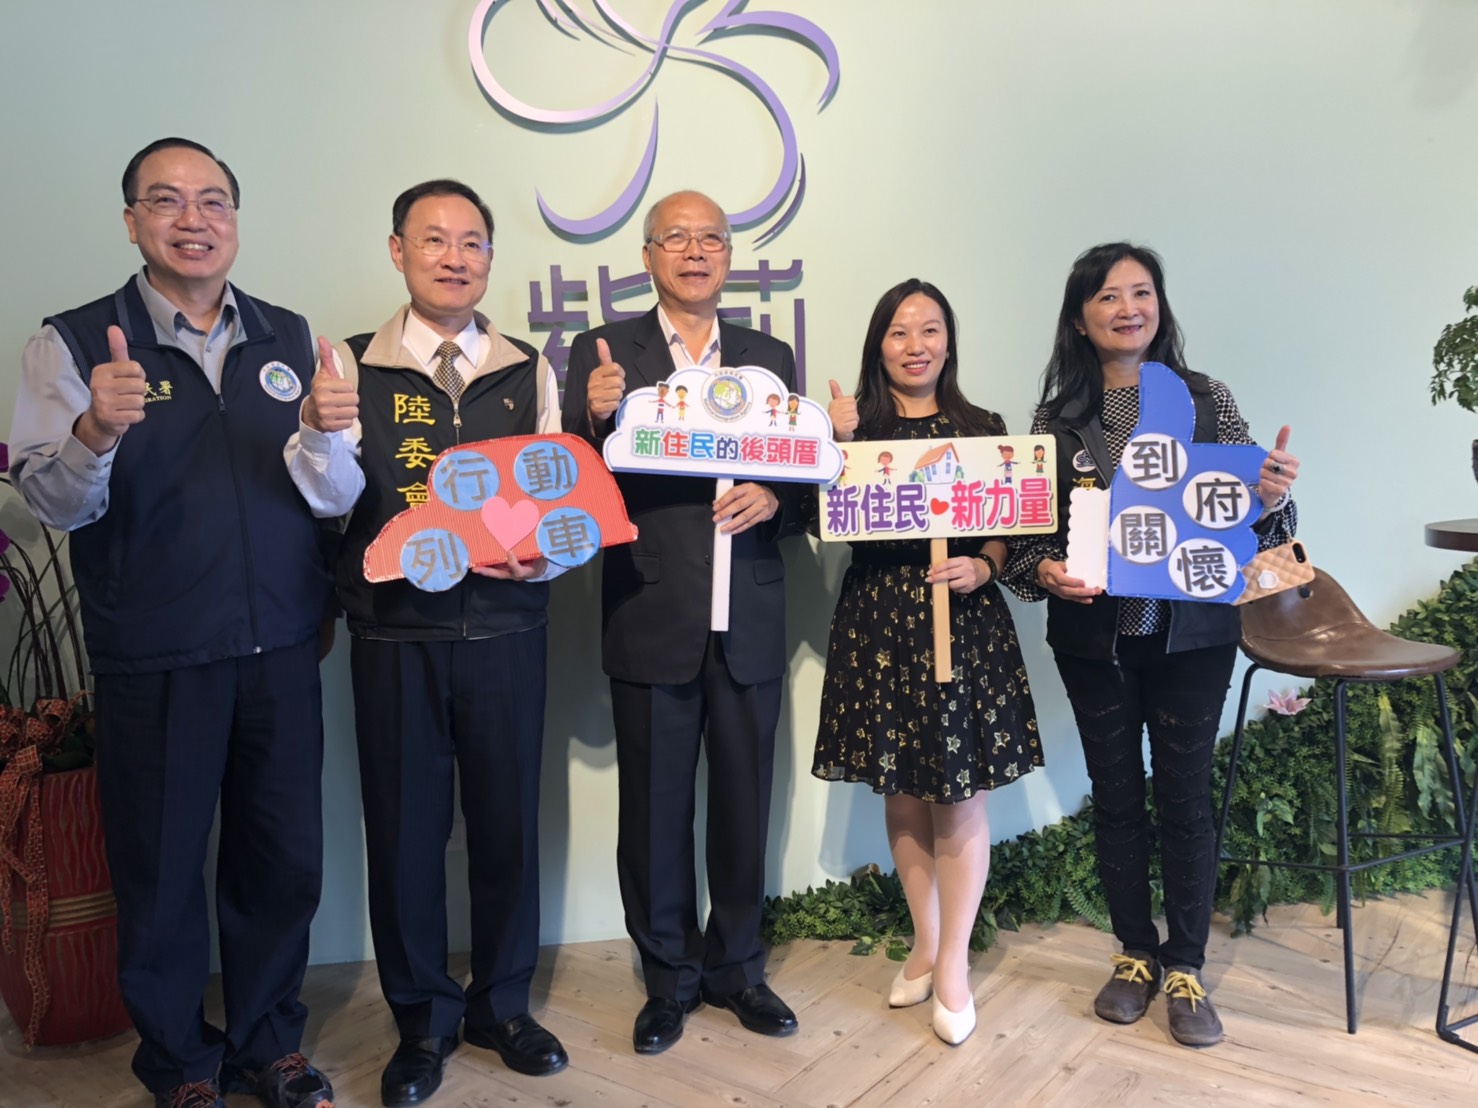  Head of North District Affairs Brigade Tang Minyao (唐敏耀), left three, and Director of the Taoyuan City Service Station Lin Wan-yi(林萬益), left one, accompanied with officials of Mainland Affairs Council and Straits Exchange Foundation to visit outstanding new residents in Taoyuan. Huang Chi-man, left four, new resident founder of Purple Seed.